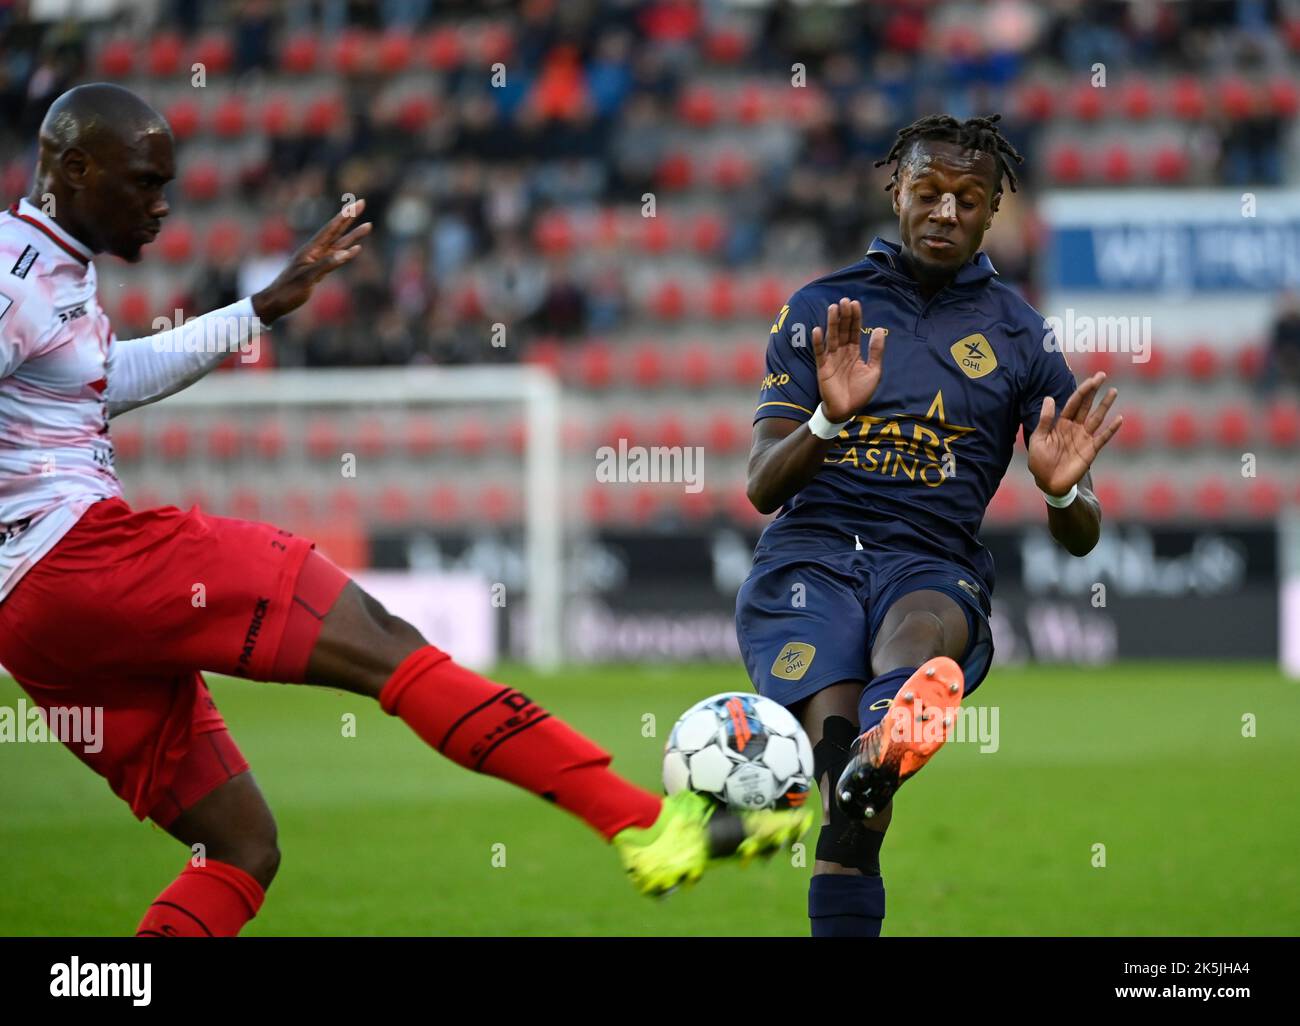 Essevee's Ravi Tsouka and OHL's Hamza Mendyl fight for the ball during a soccer match between SV Zulte Waregem and OH Leuven, Saturday 08 October 2022 in Waregem, on day 11 of the 2022-2023 'Jupiler Pro League' first division of the Belgian championship. BELGA PHOTO JOHN THYS Stock Photo